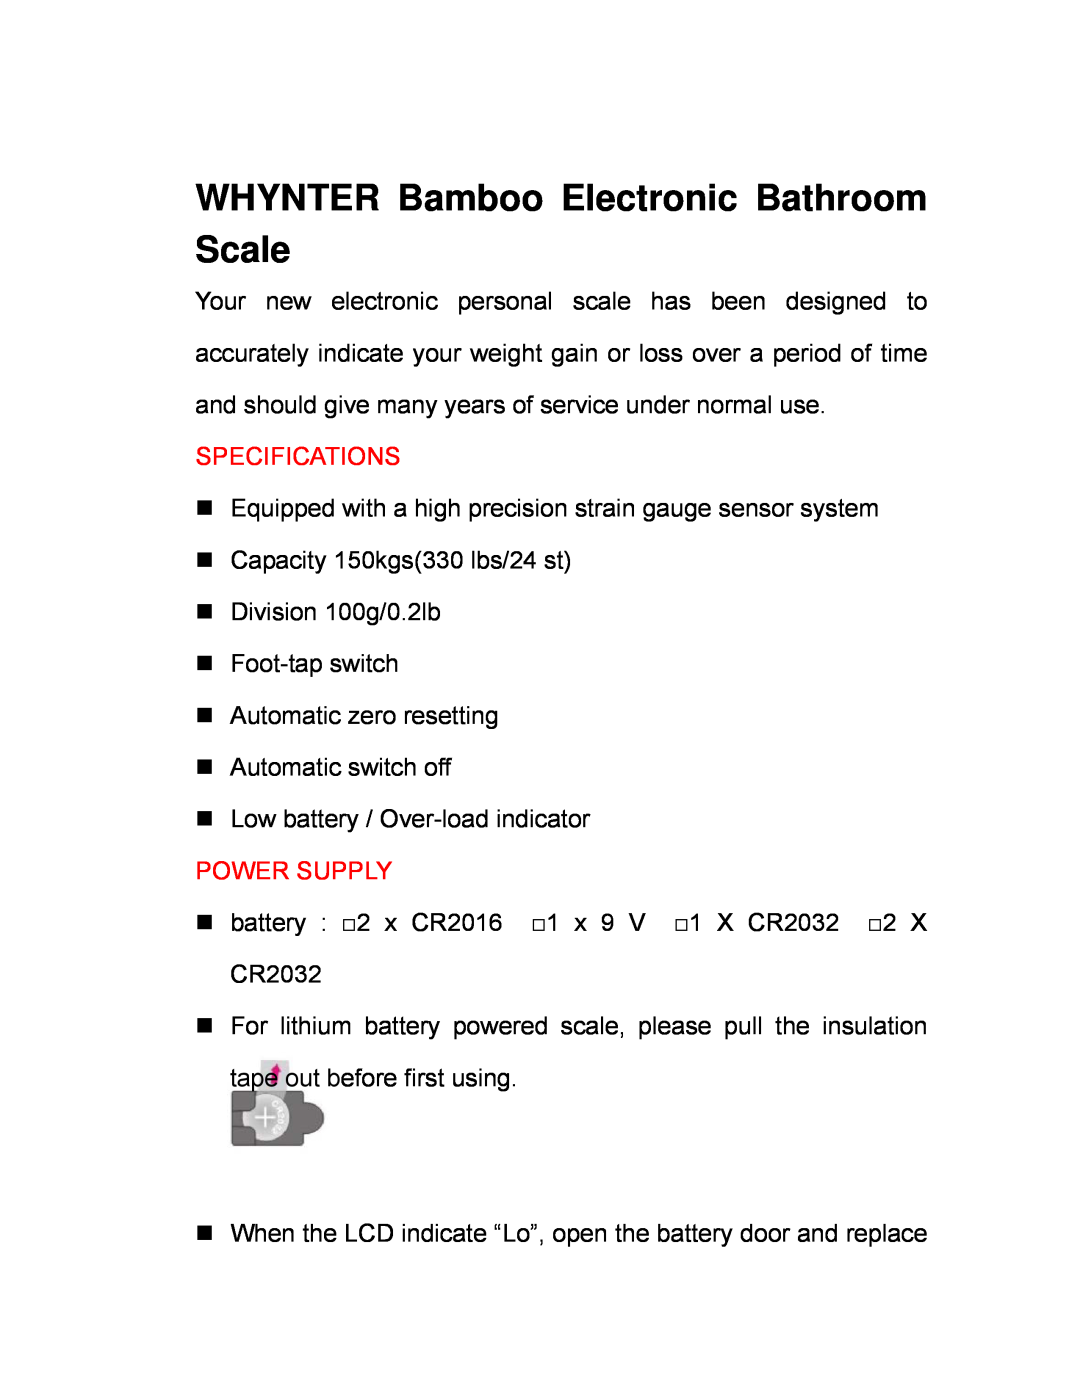 Whynter BH-2000 manual Specifications, Power Supply, WHYNTER Bamboo Electronic Bathroom Scale 